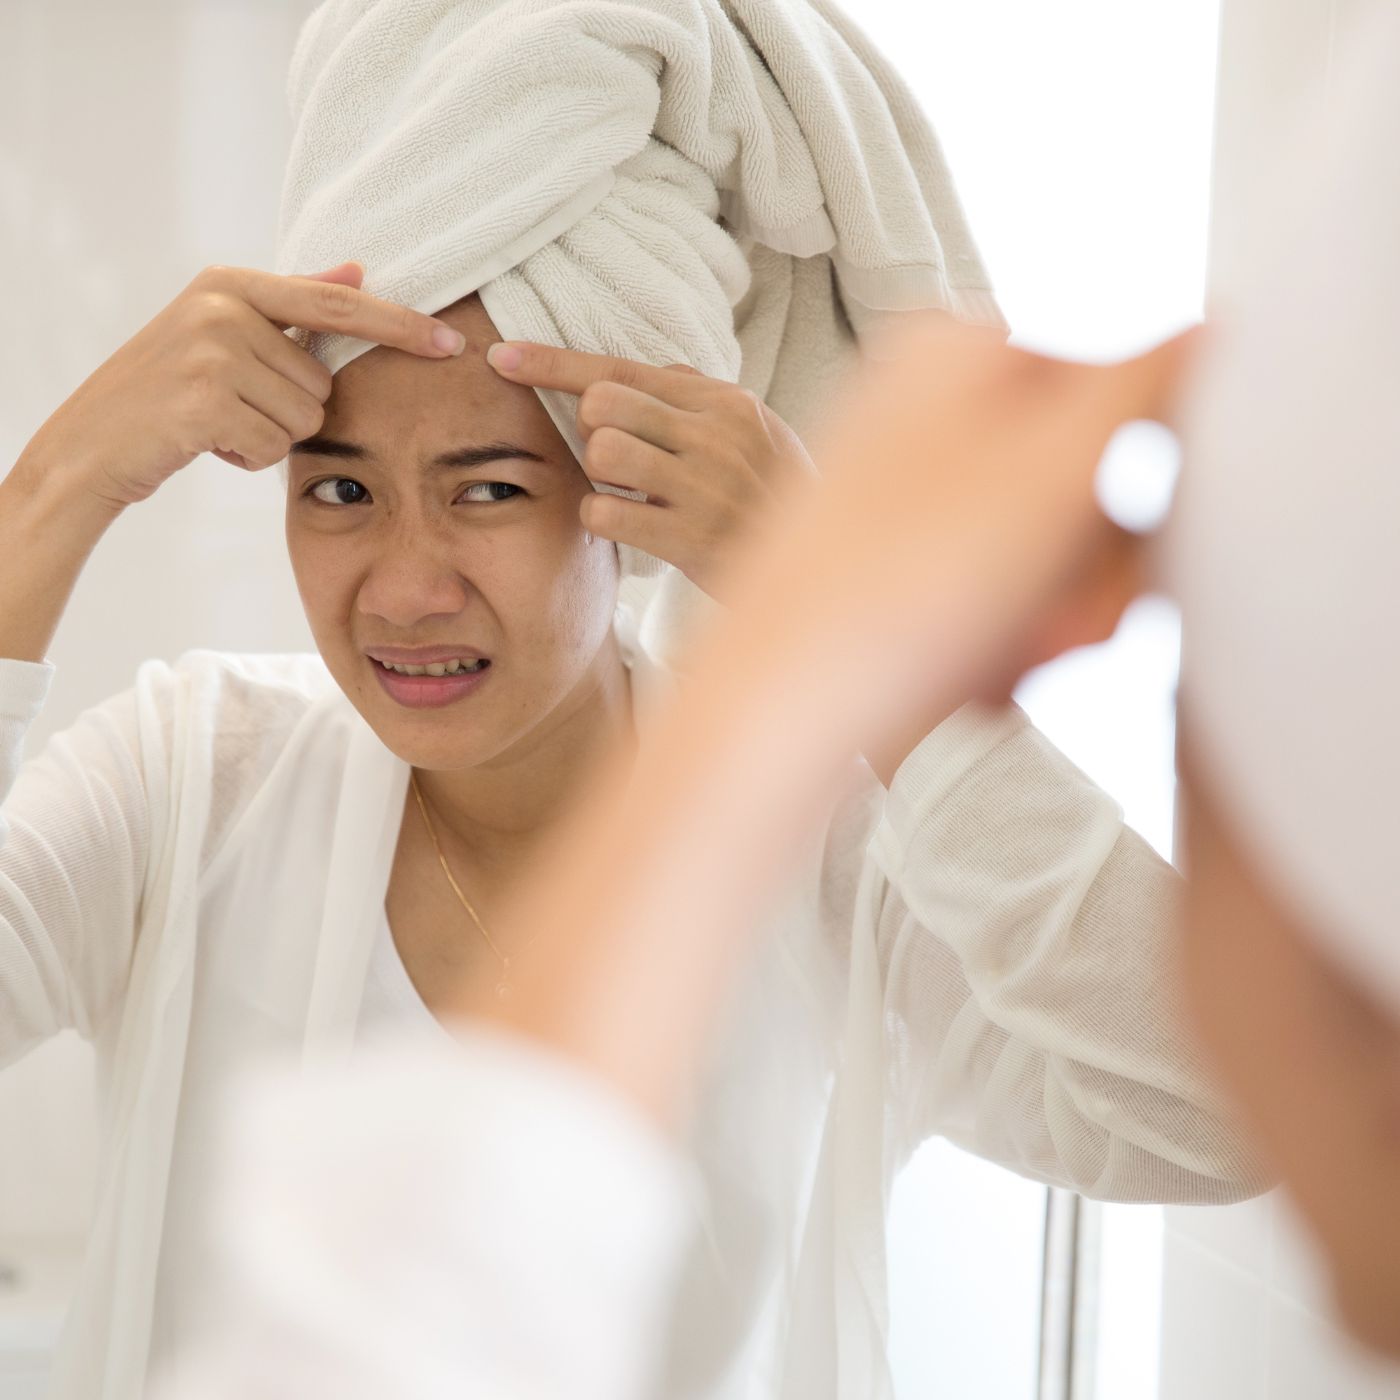 Steps to manage acne and breakouts: How to prevent it and how to treat breakouts.